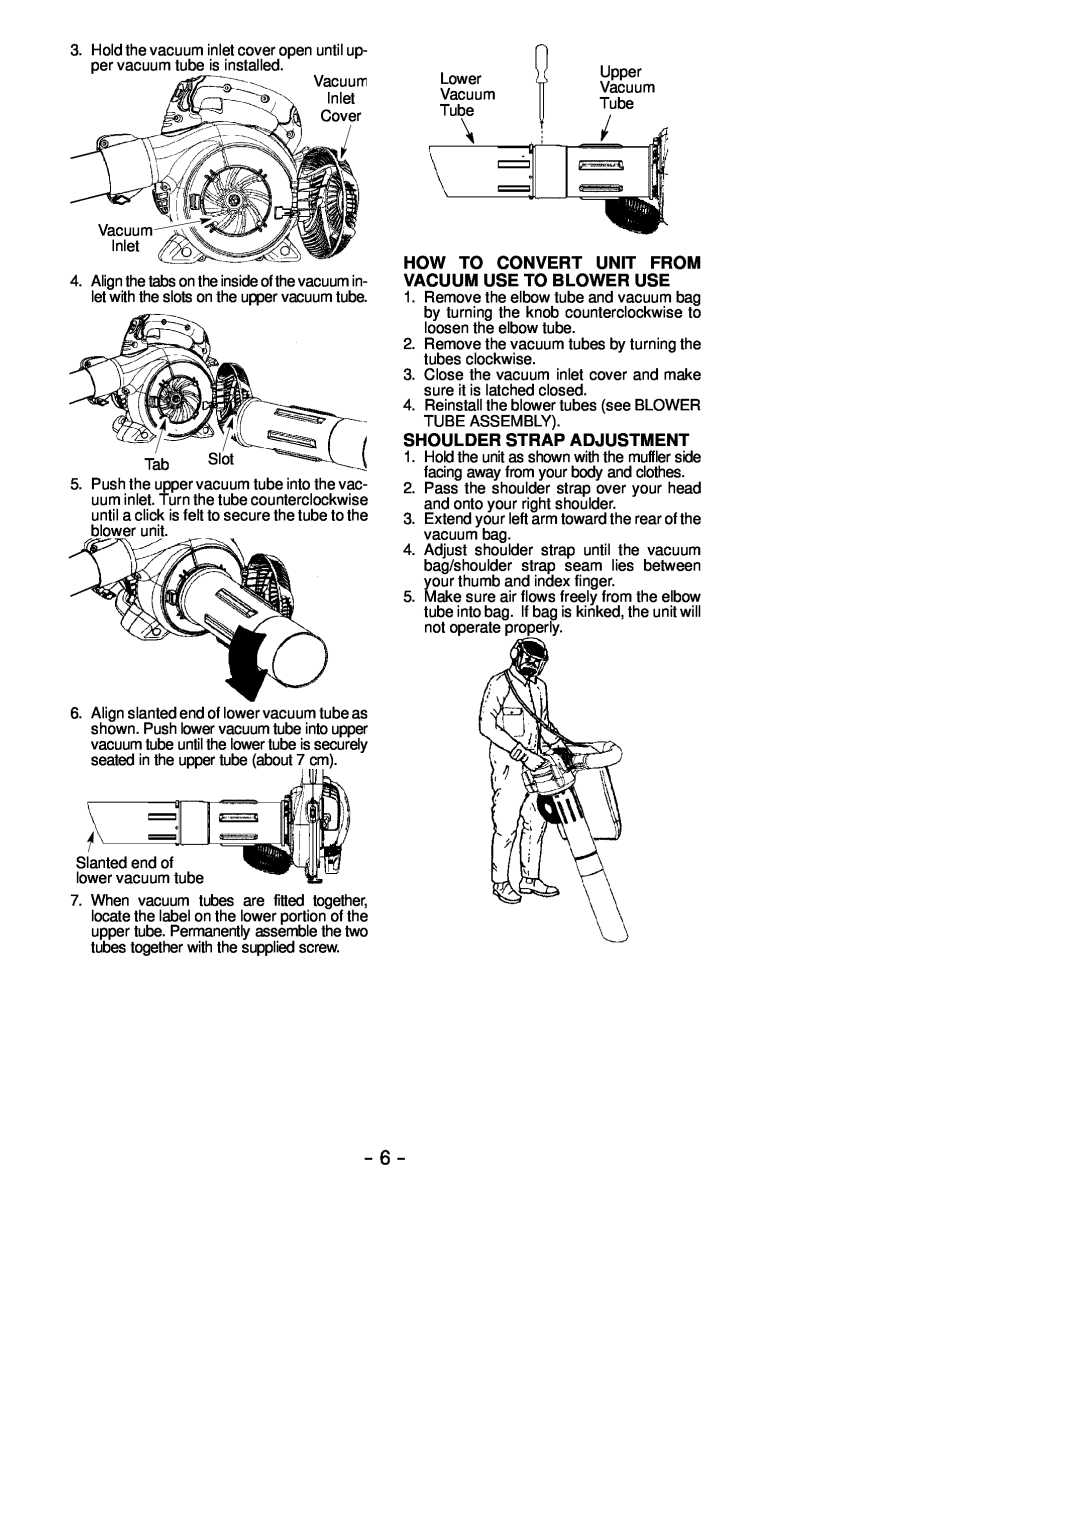 McCulloch MAC GBV 345 instruction manual How To Convert Unit From Vacuum Use To Blower Use, Shoulder Strap Adjustment 